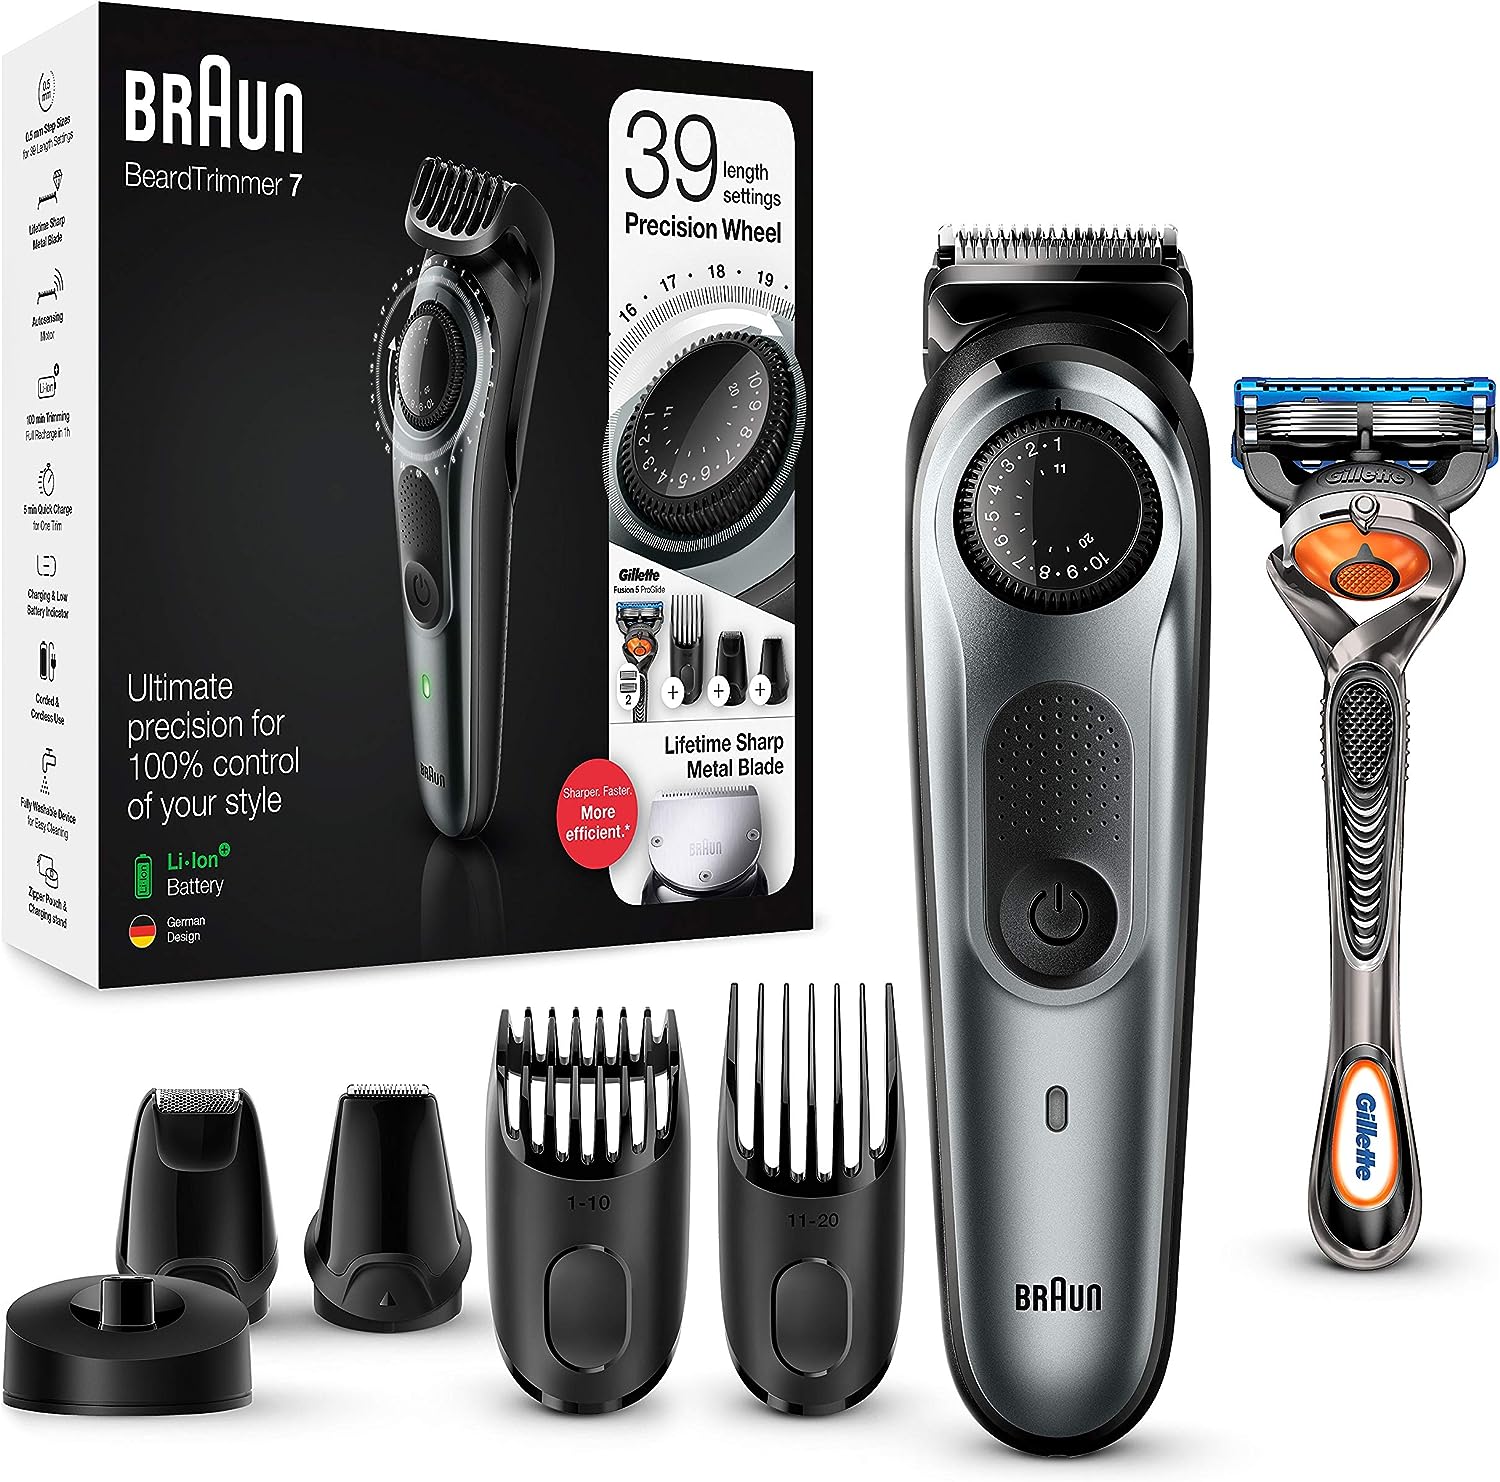 Braun Beard Trimmer and Hair Clippers with Gillette Fusion5 ProGlide Razor, 39 Length Settings, Gifts For Men, UK 2 Pin Plug, BT7240, Black/Grey